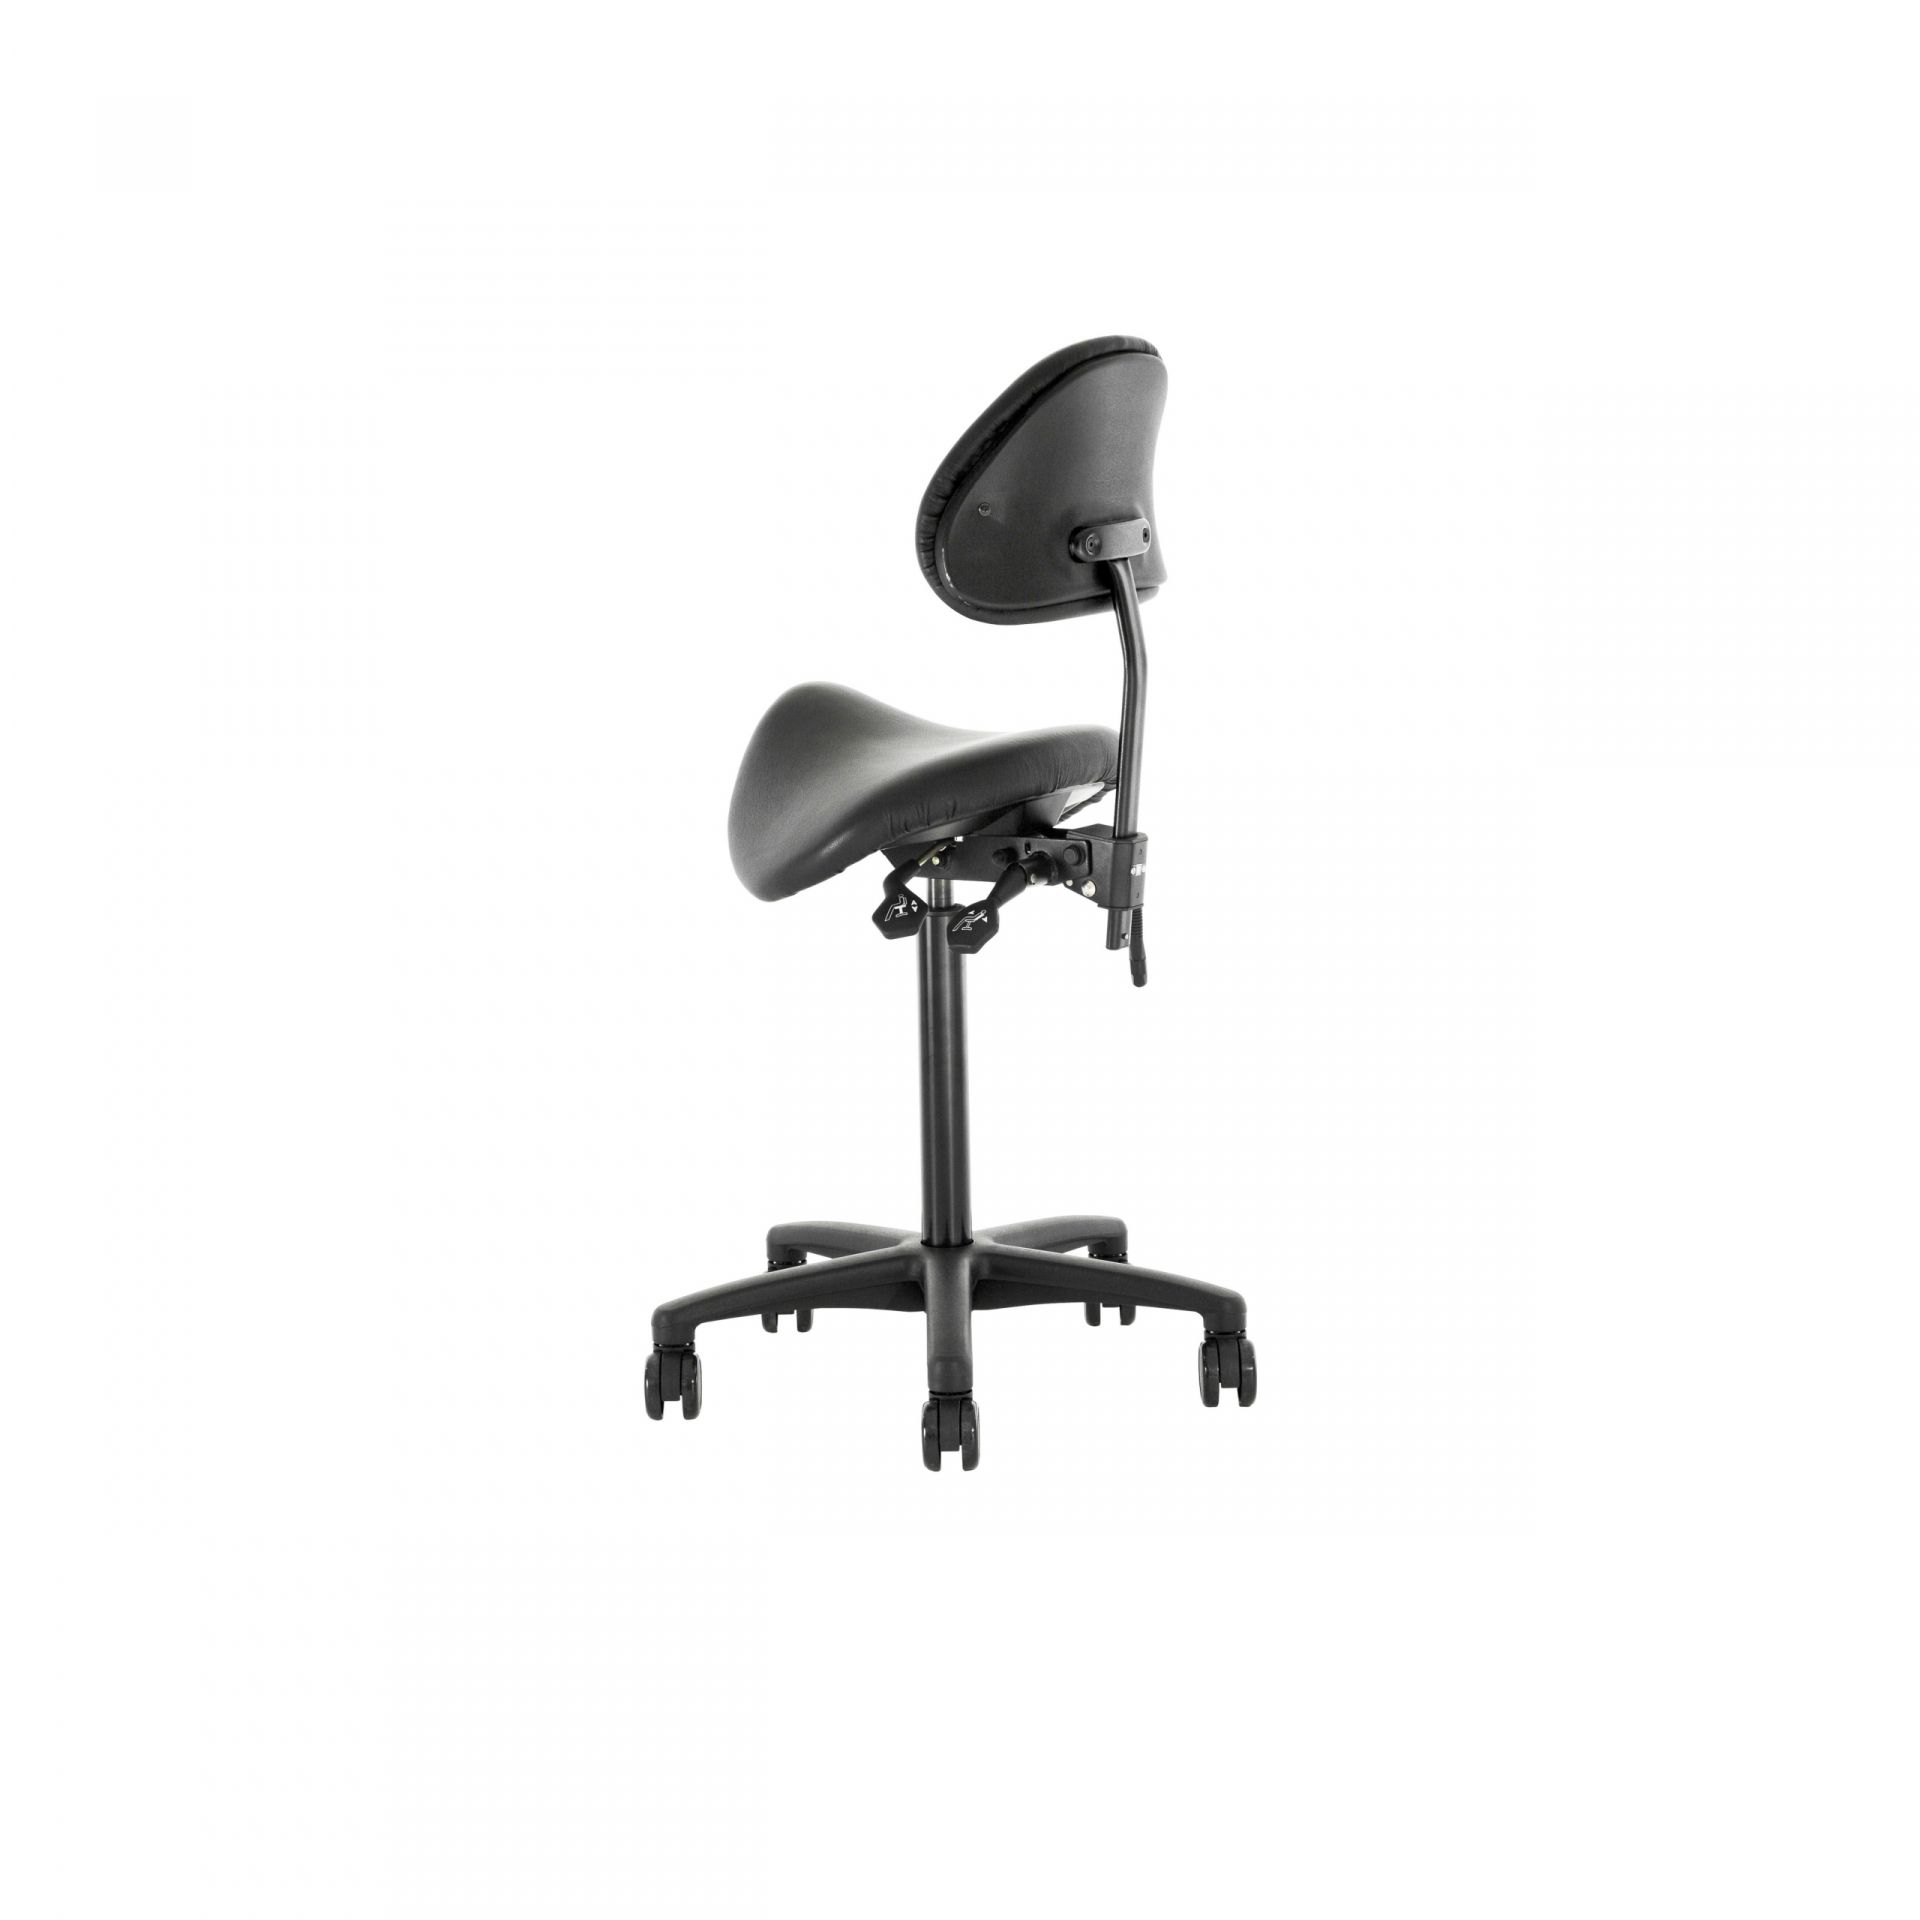 Saddle seat Office chair with saddle seat product image 2